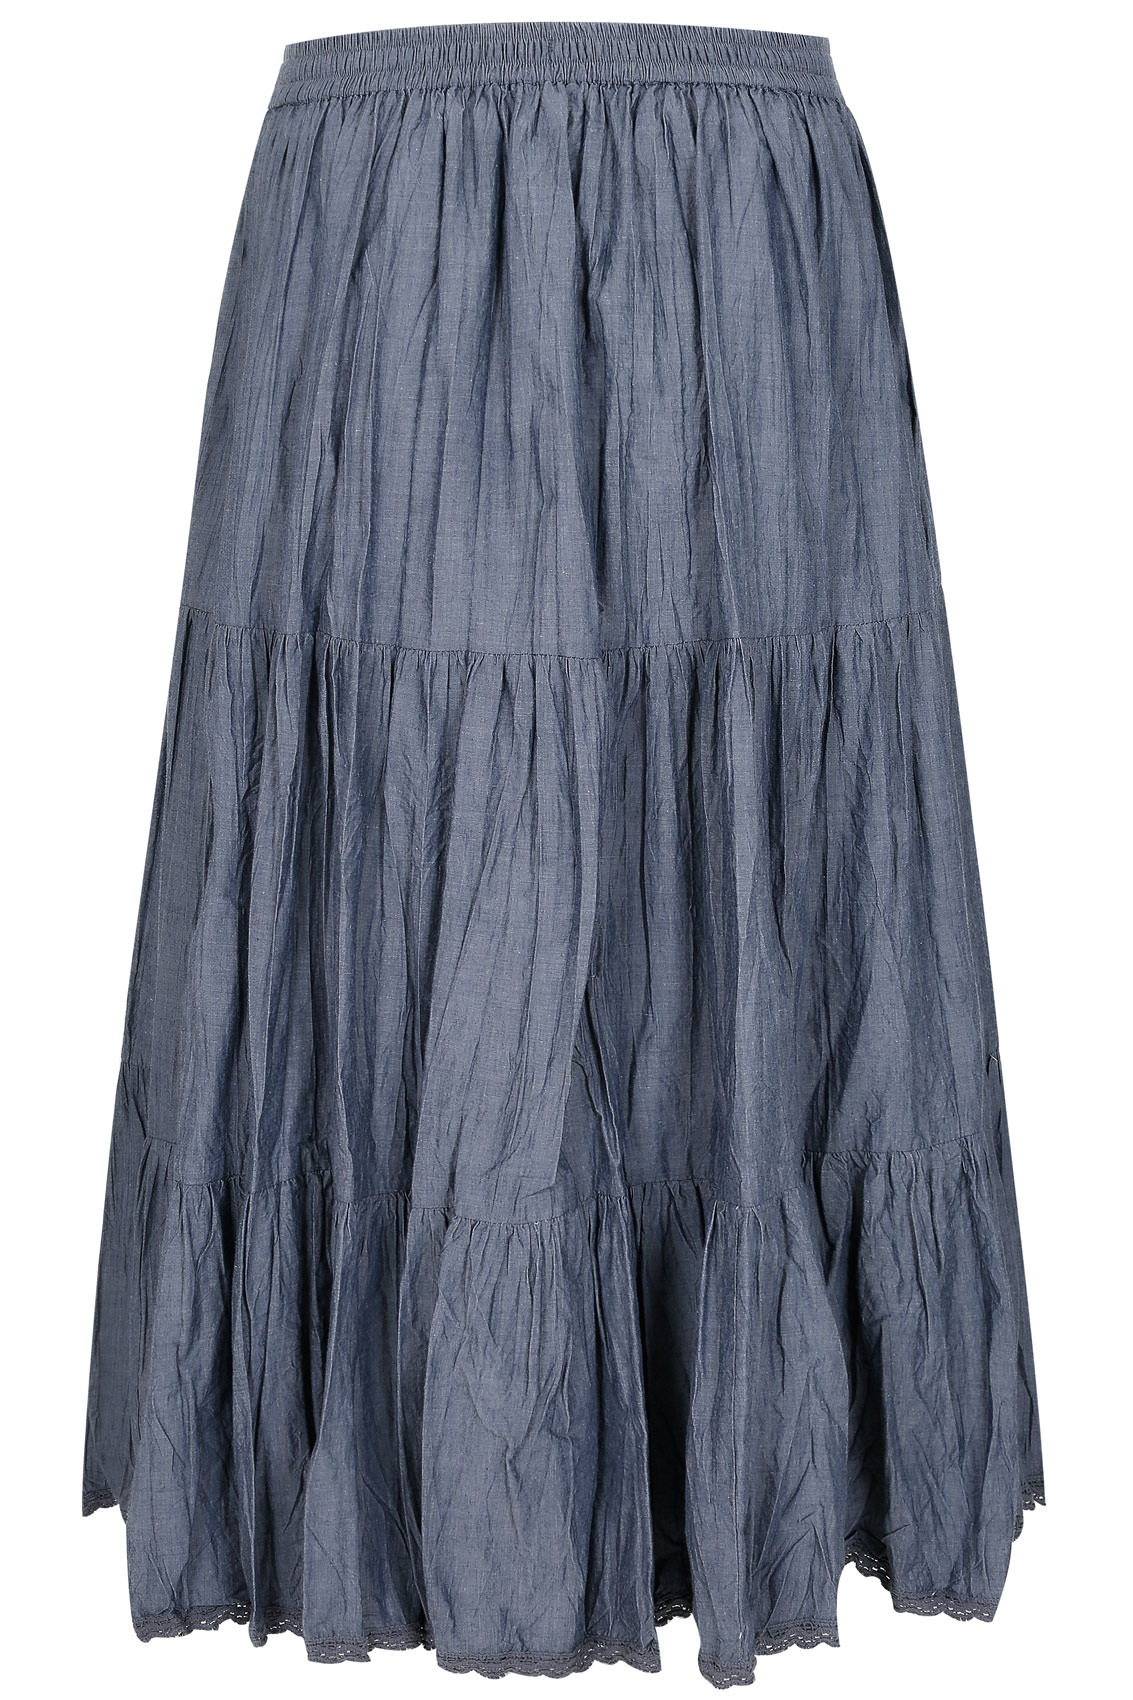 Blue Chambray Tiered Crinkle Maxi Skirt, Plus size 16 to 36